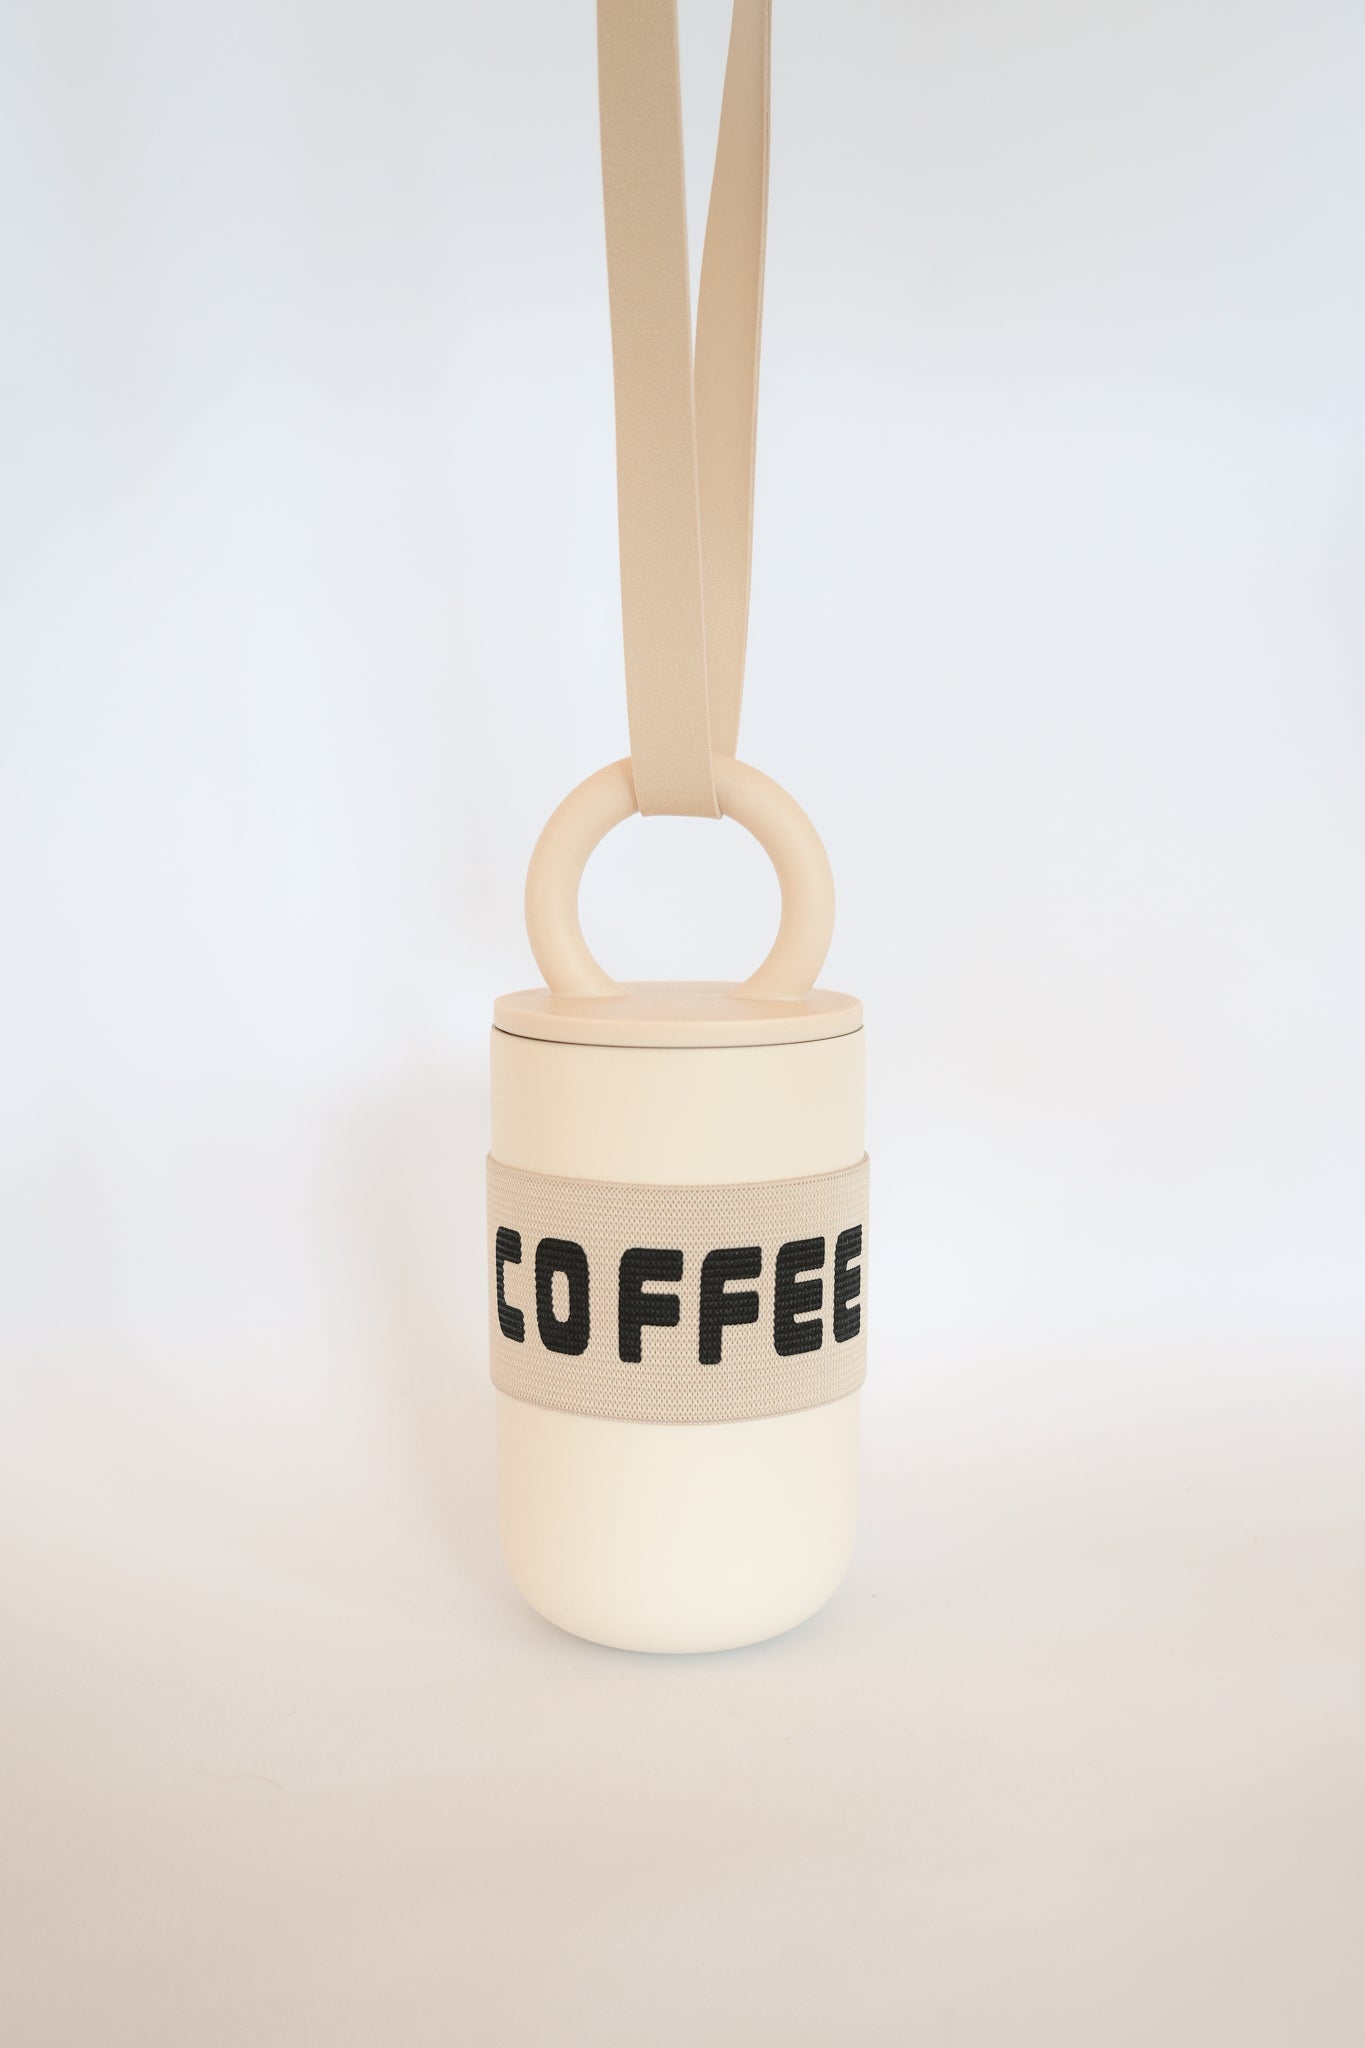 THE TRAVEL COFFEE BOTTLE